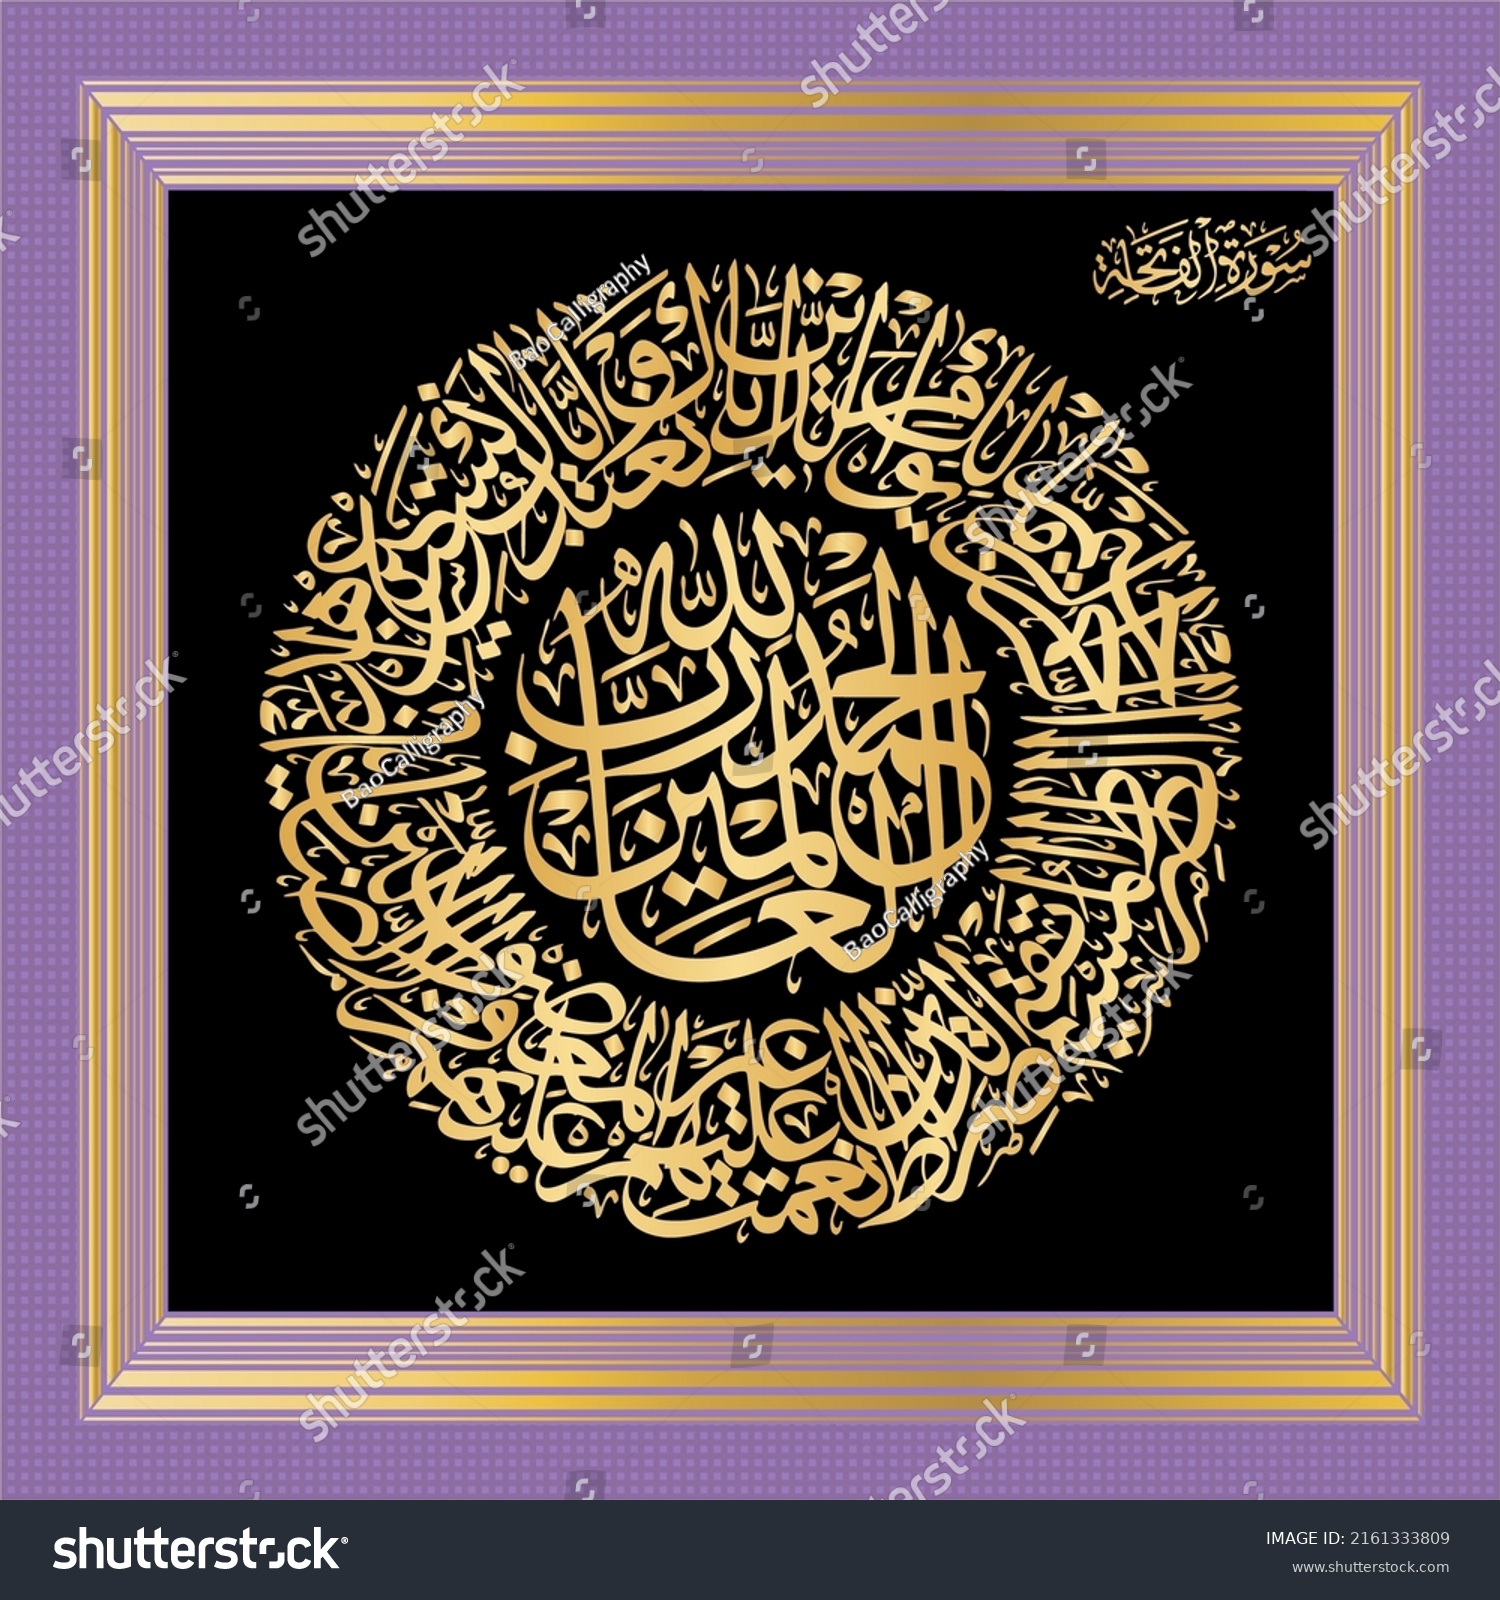 SVG of Arabic Calligraphy from chapter 